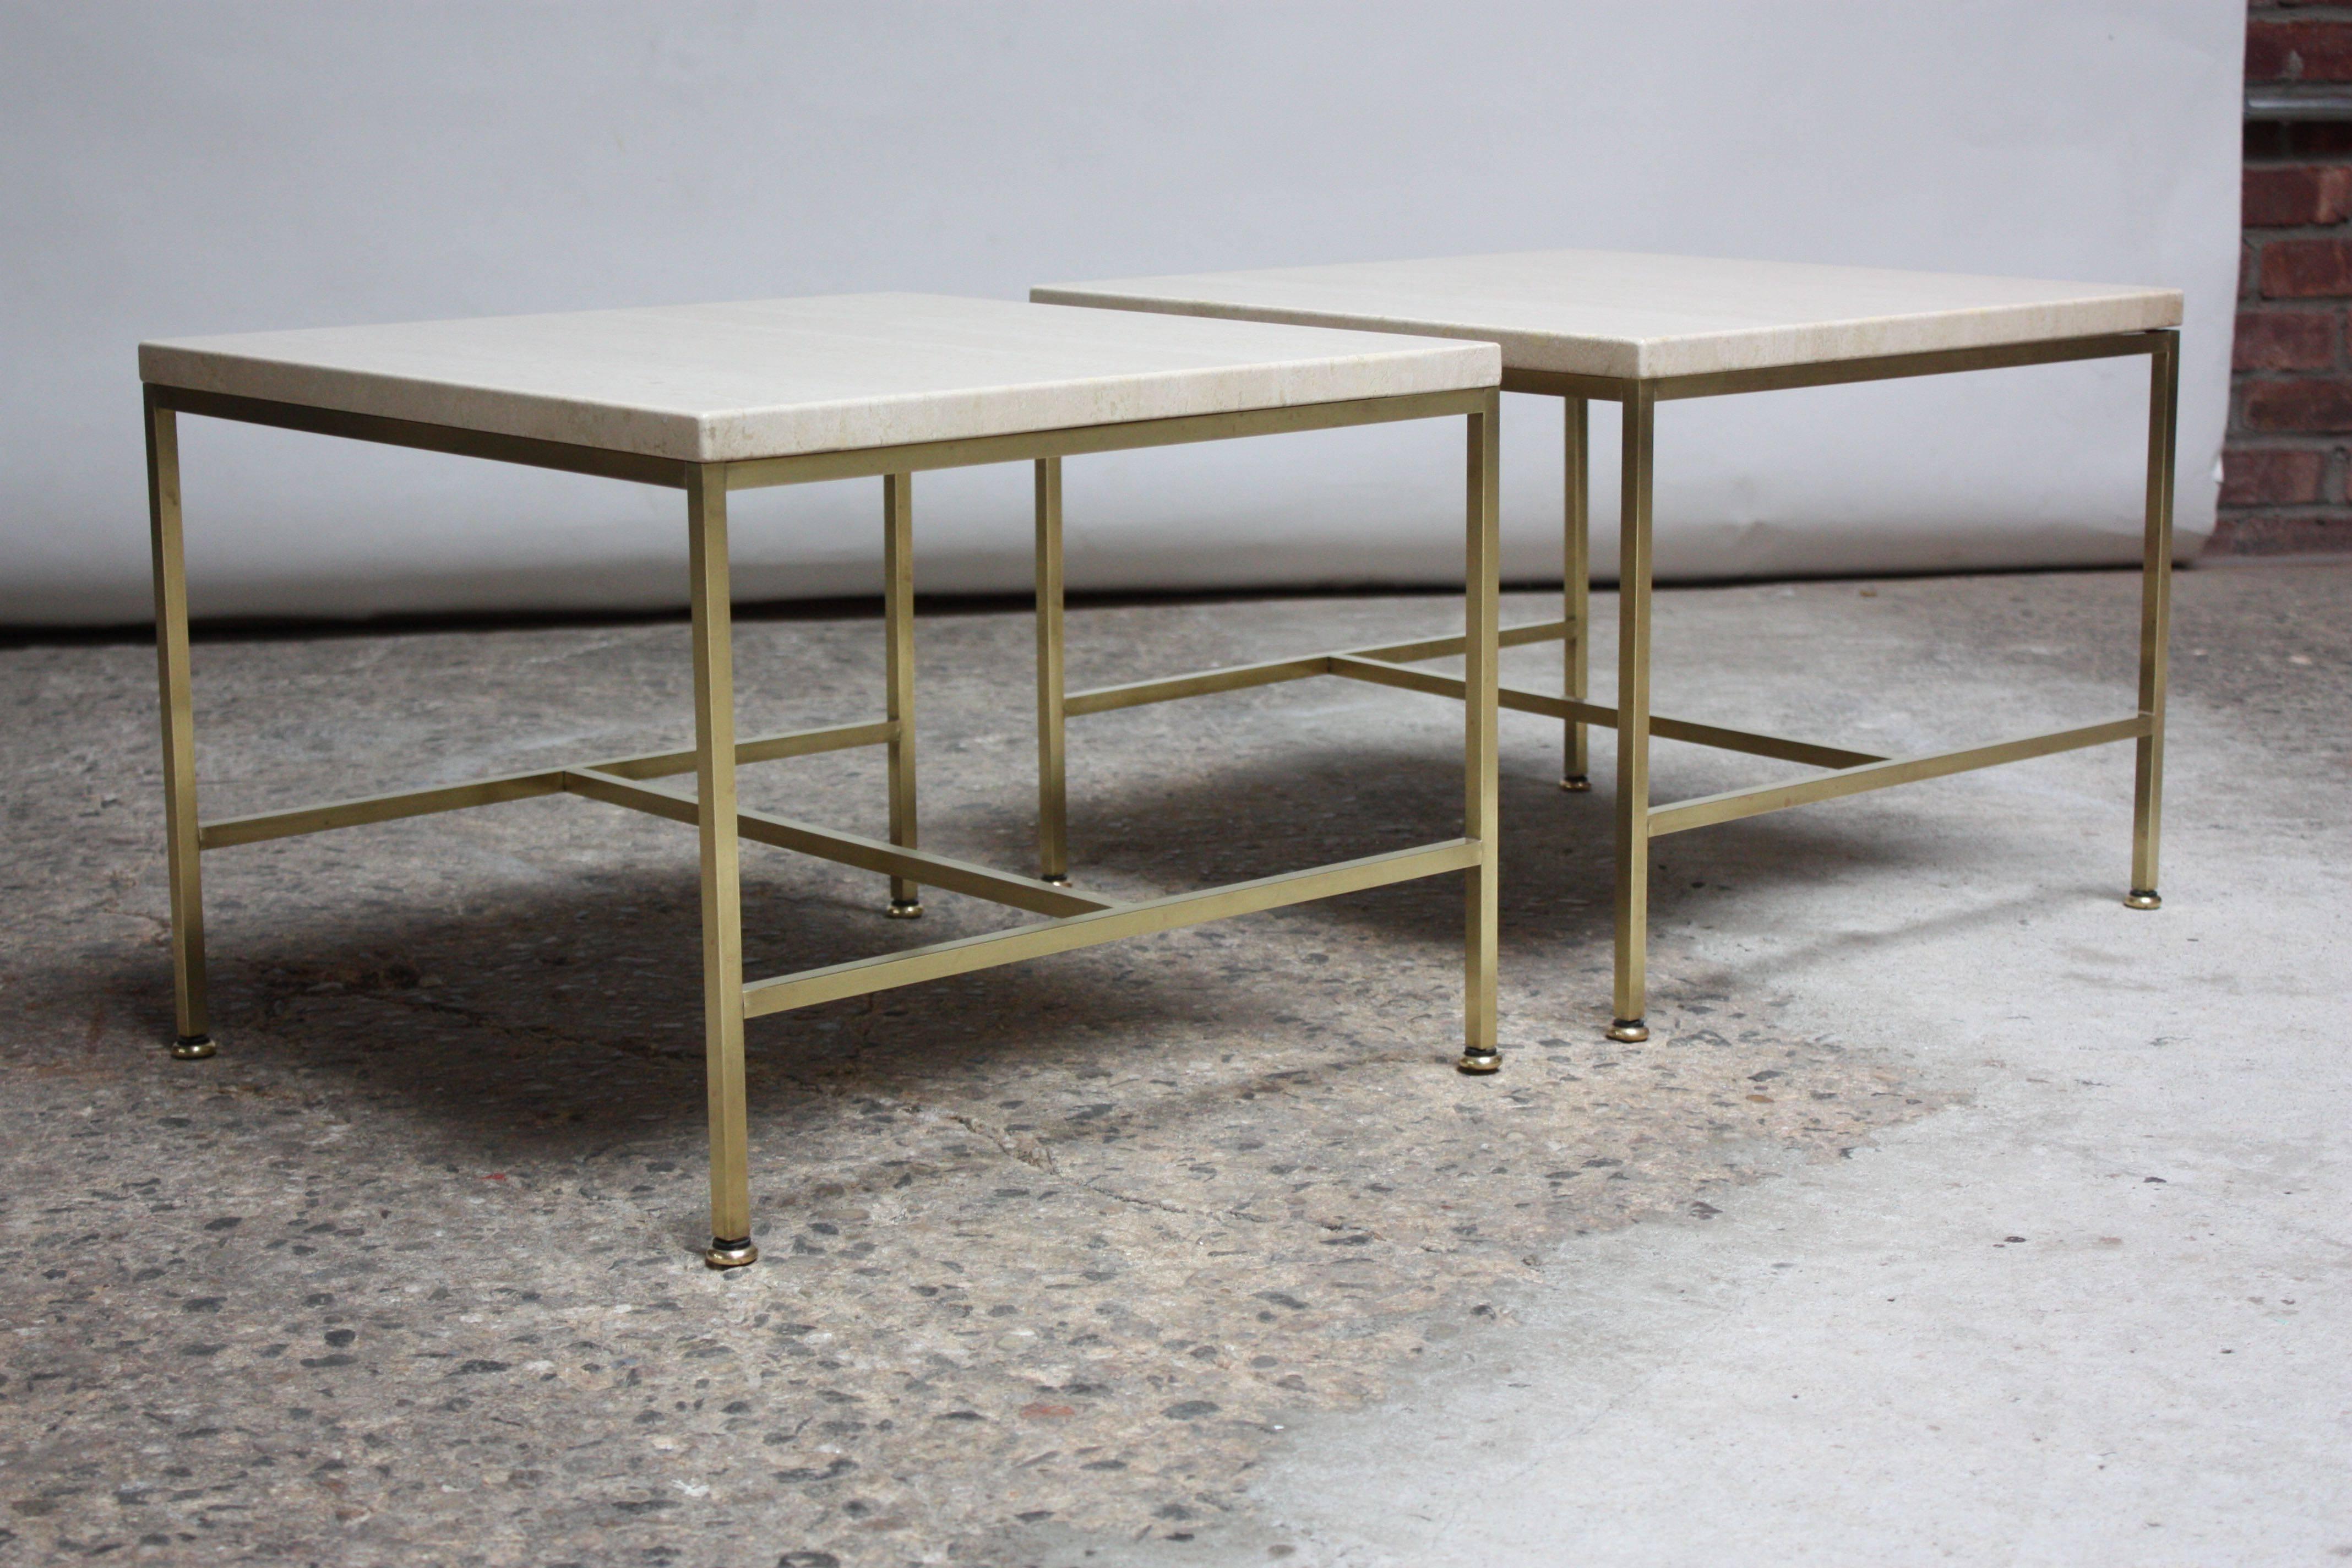 Pair of 1950s Paul McCobb for Directional side / occasional tables composed of tubular brass frames / brass feet and square, travertine tops. Brass is in beautiful, polished condition; showing only minor wear (light spots remain post-buff and polish